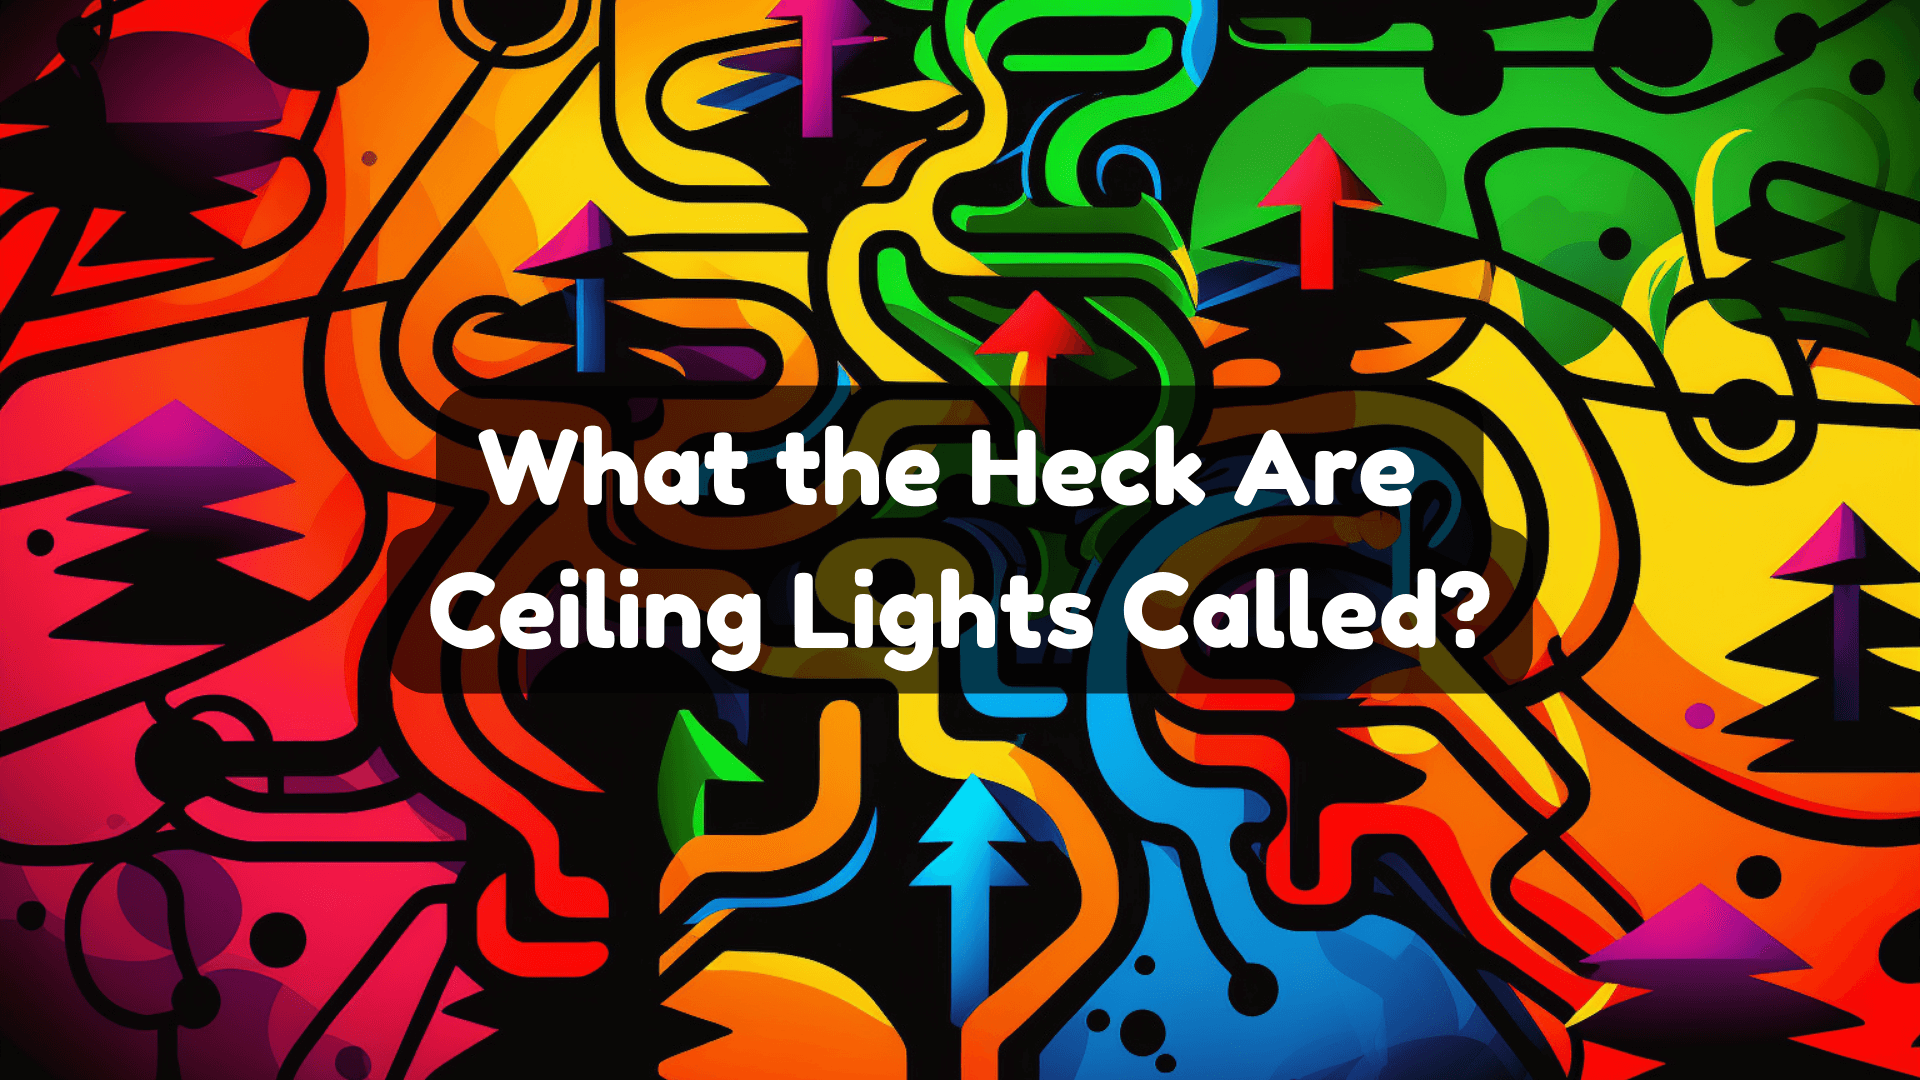 What the Heck Are Ceiling Lights Called?